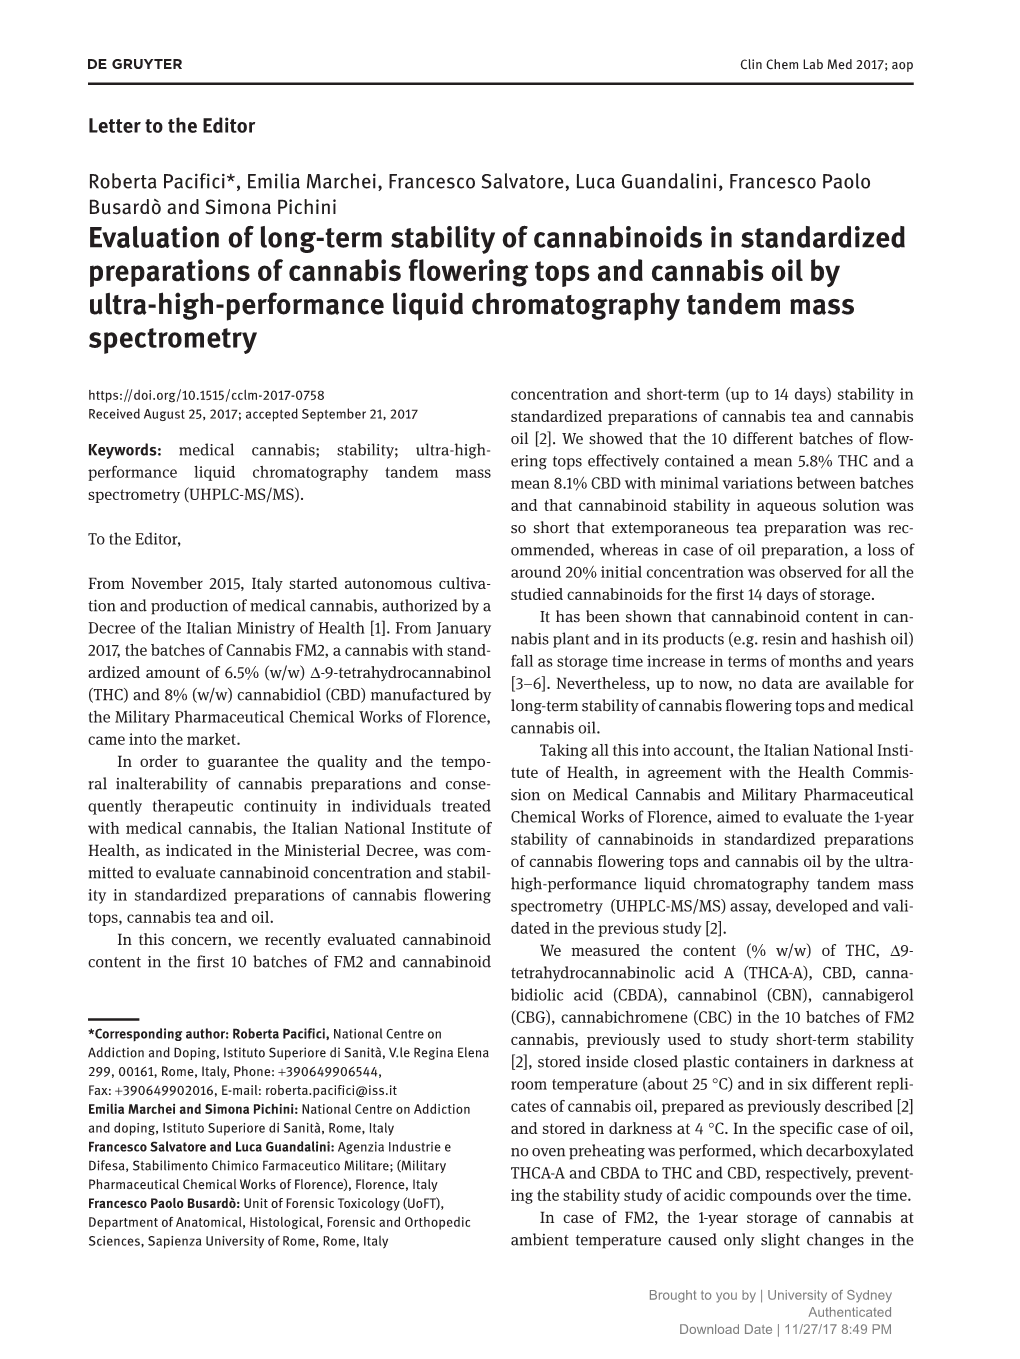 Evaluation of Long-Term Stability of Cannabinoids in Standardized